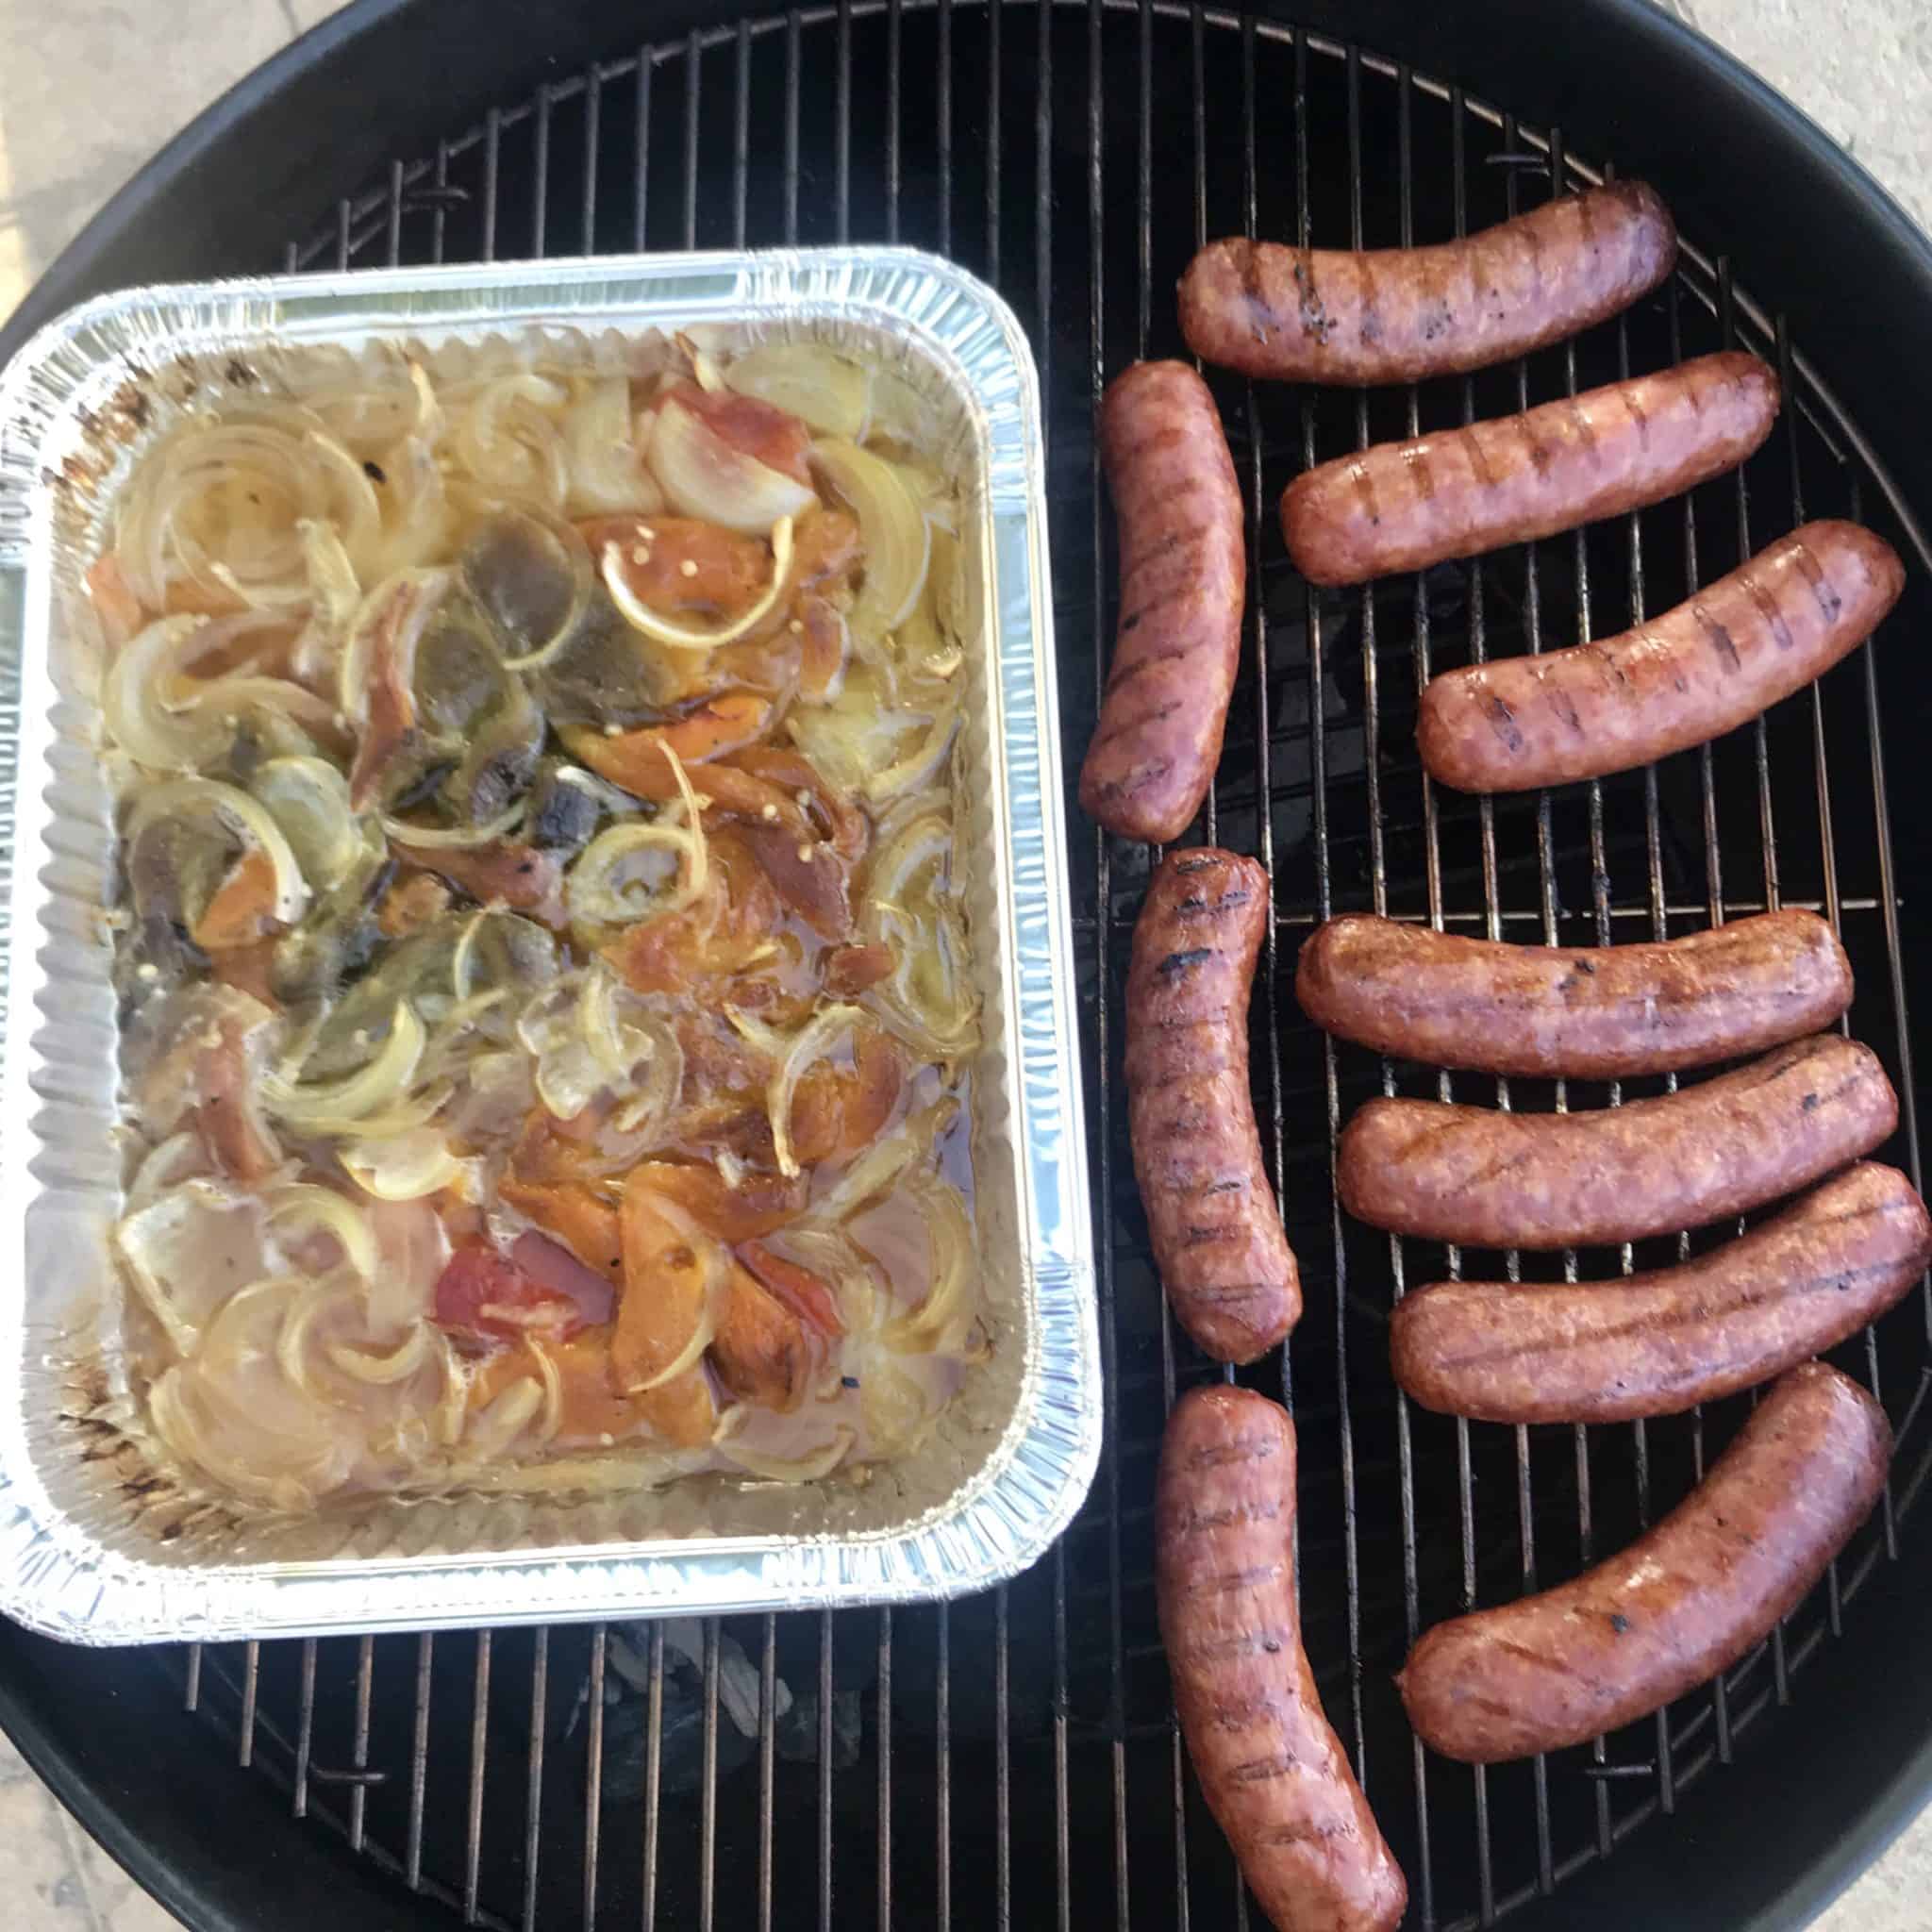 Sausage and Peppers on weber grill overhead shot